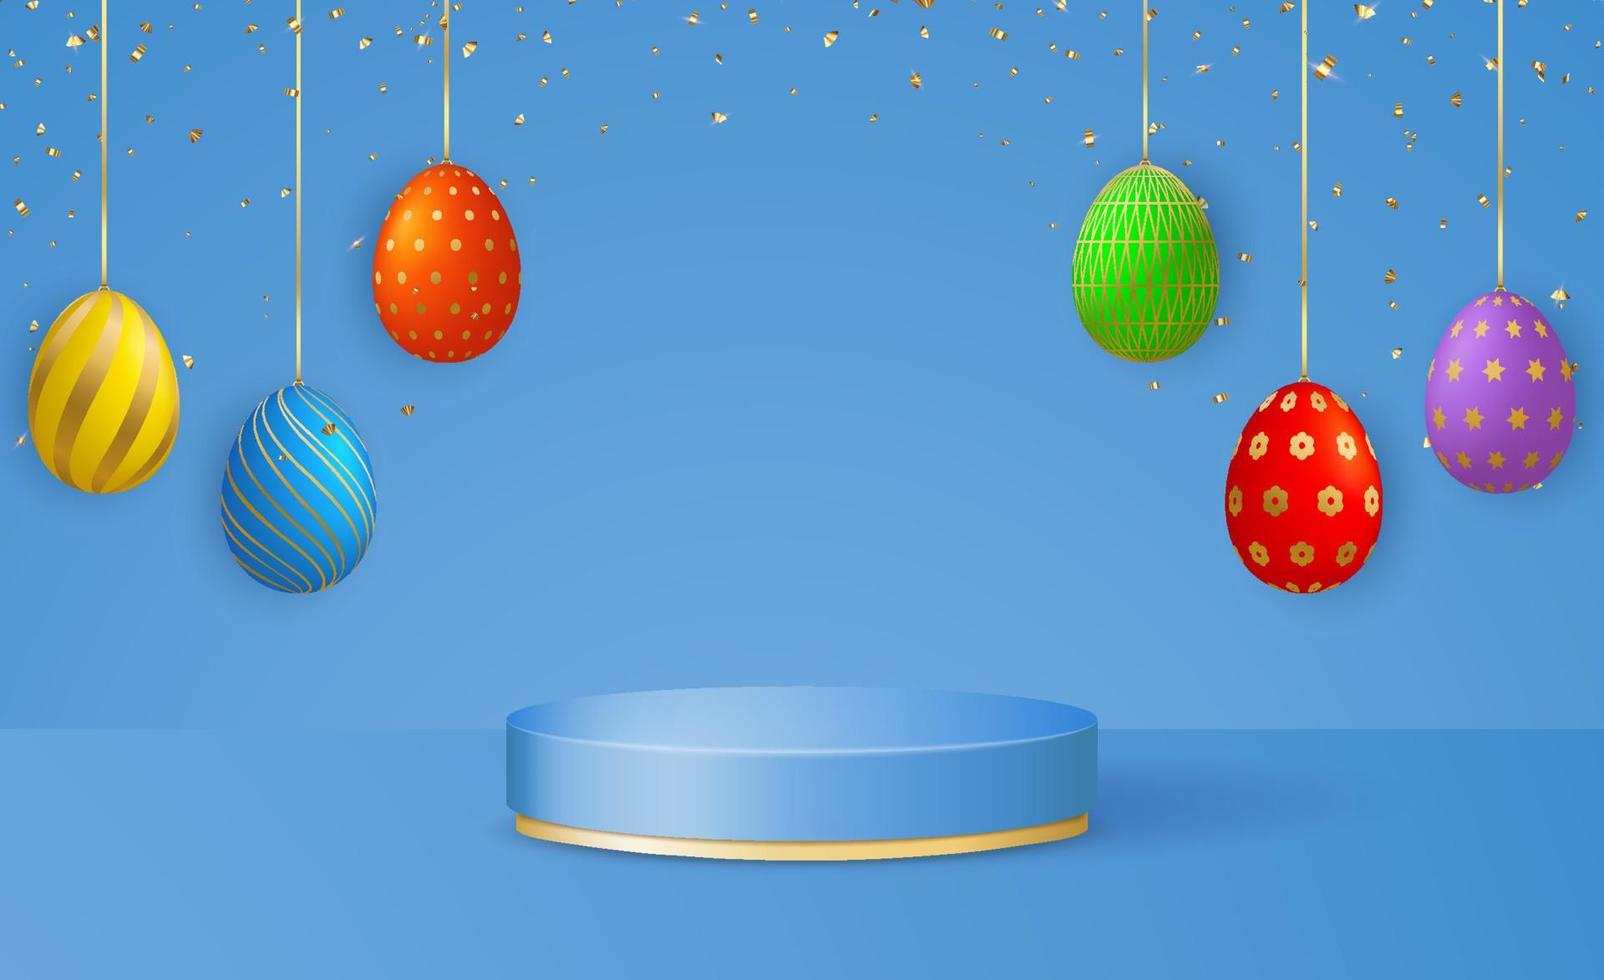 Happy Easter Day 3d scene with podium platform, bright Easter eggs garlands and confetti on a blue background. vector